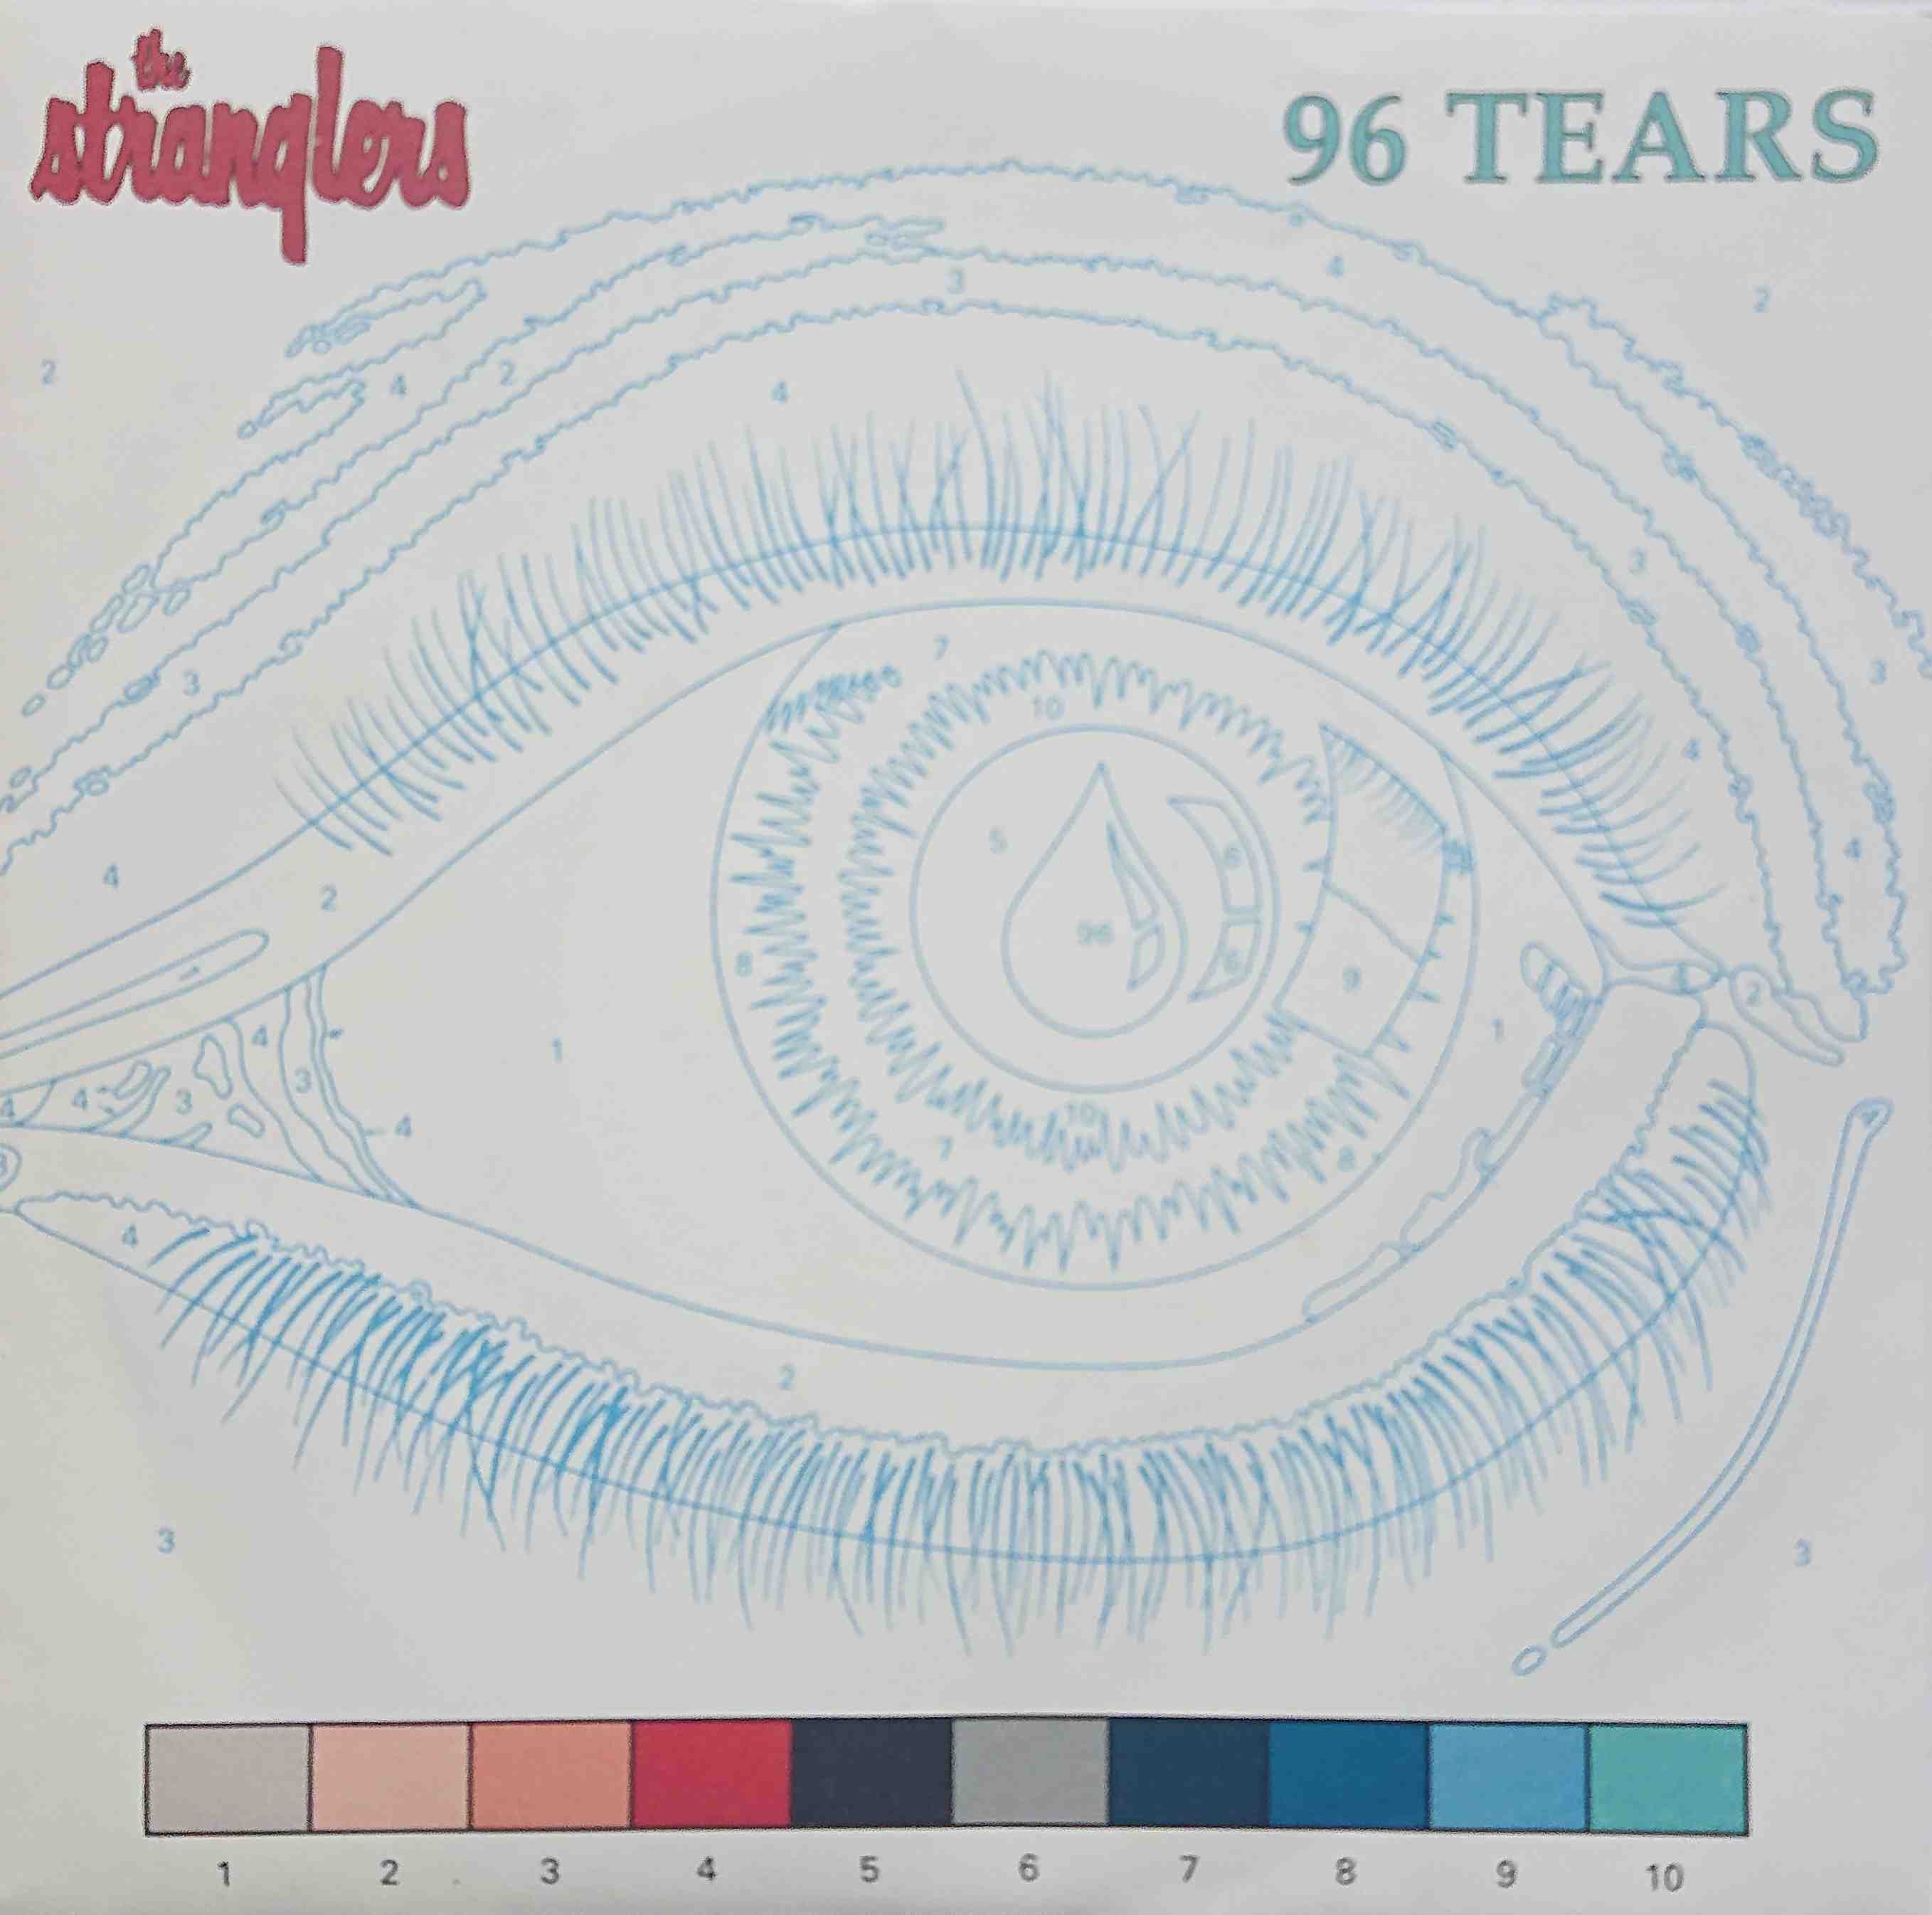 Picture of 96 tears by artist The Stranglers  from The Stranglers singles